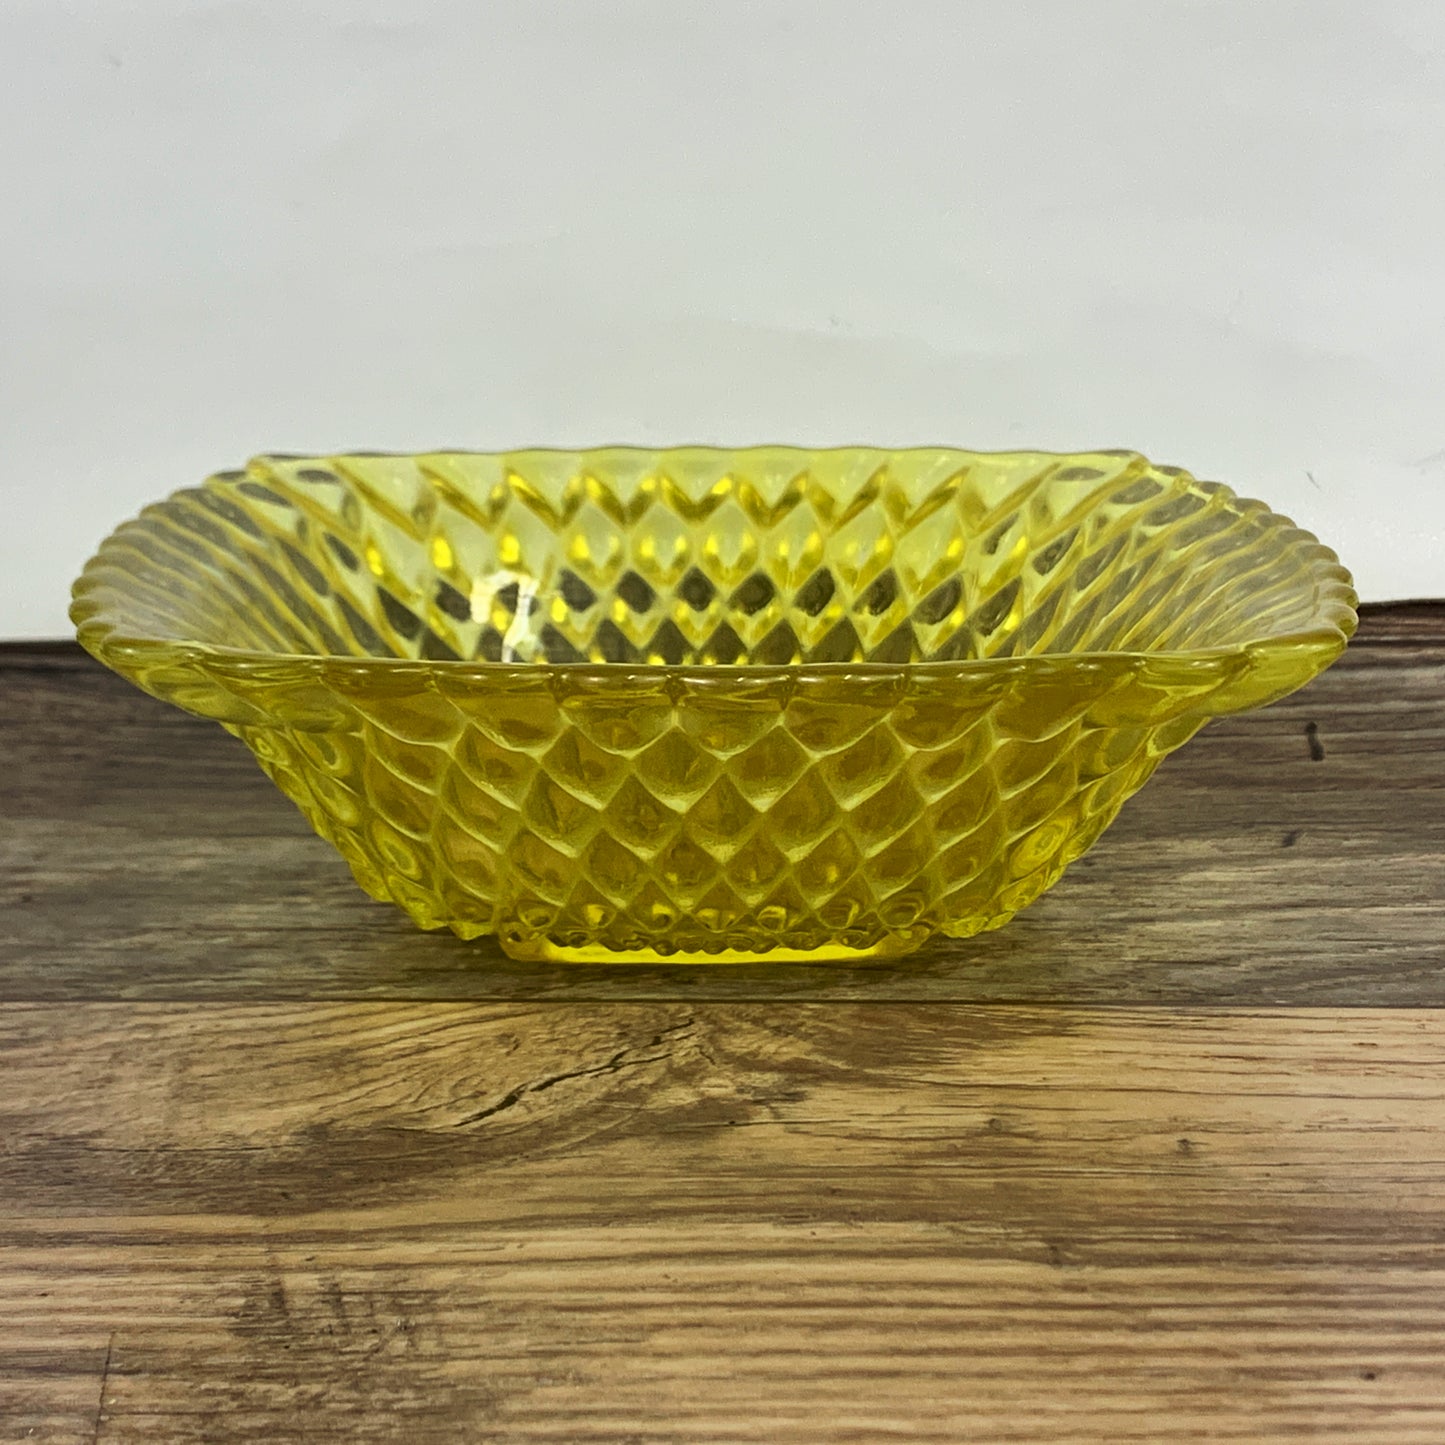 Vintage Anchor Hocking Yellow Glass Dish with Diamond Pattern, Small Square Pressed Glass Bowl